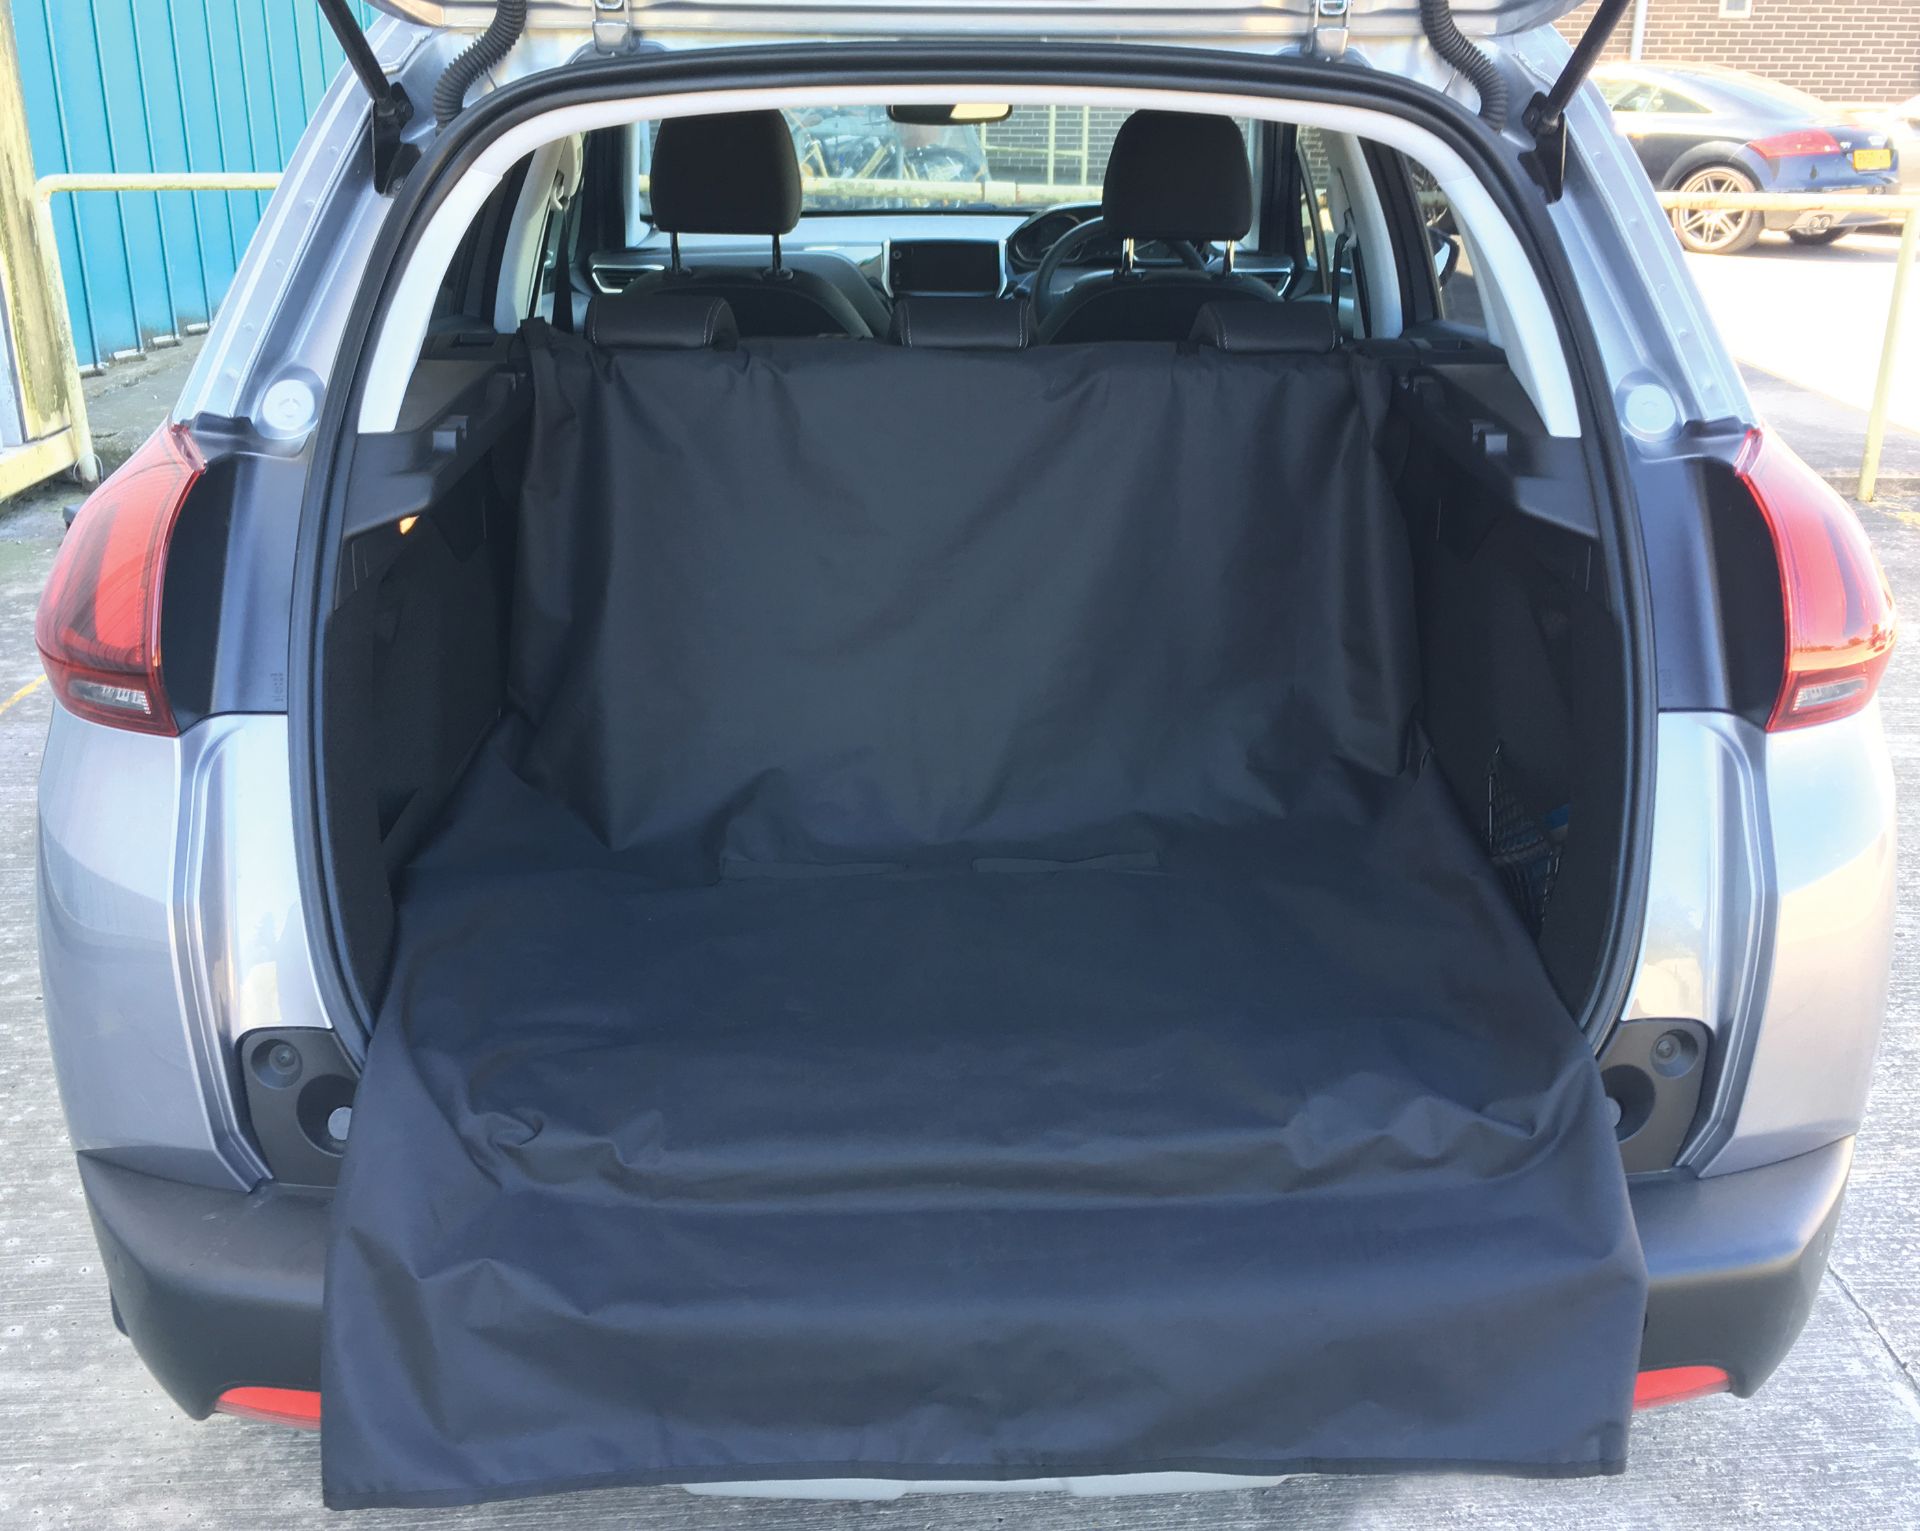 New Vehicle Seat or Boot Cover - 146 x 143cm - Image 2 of 2